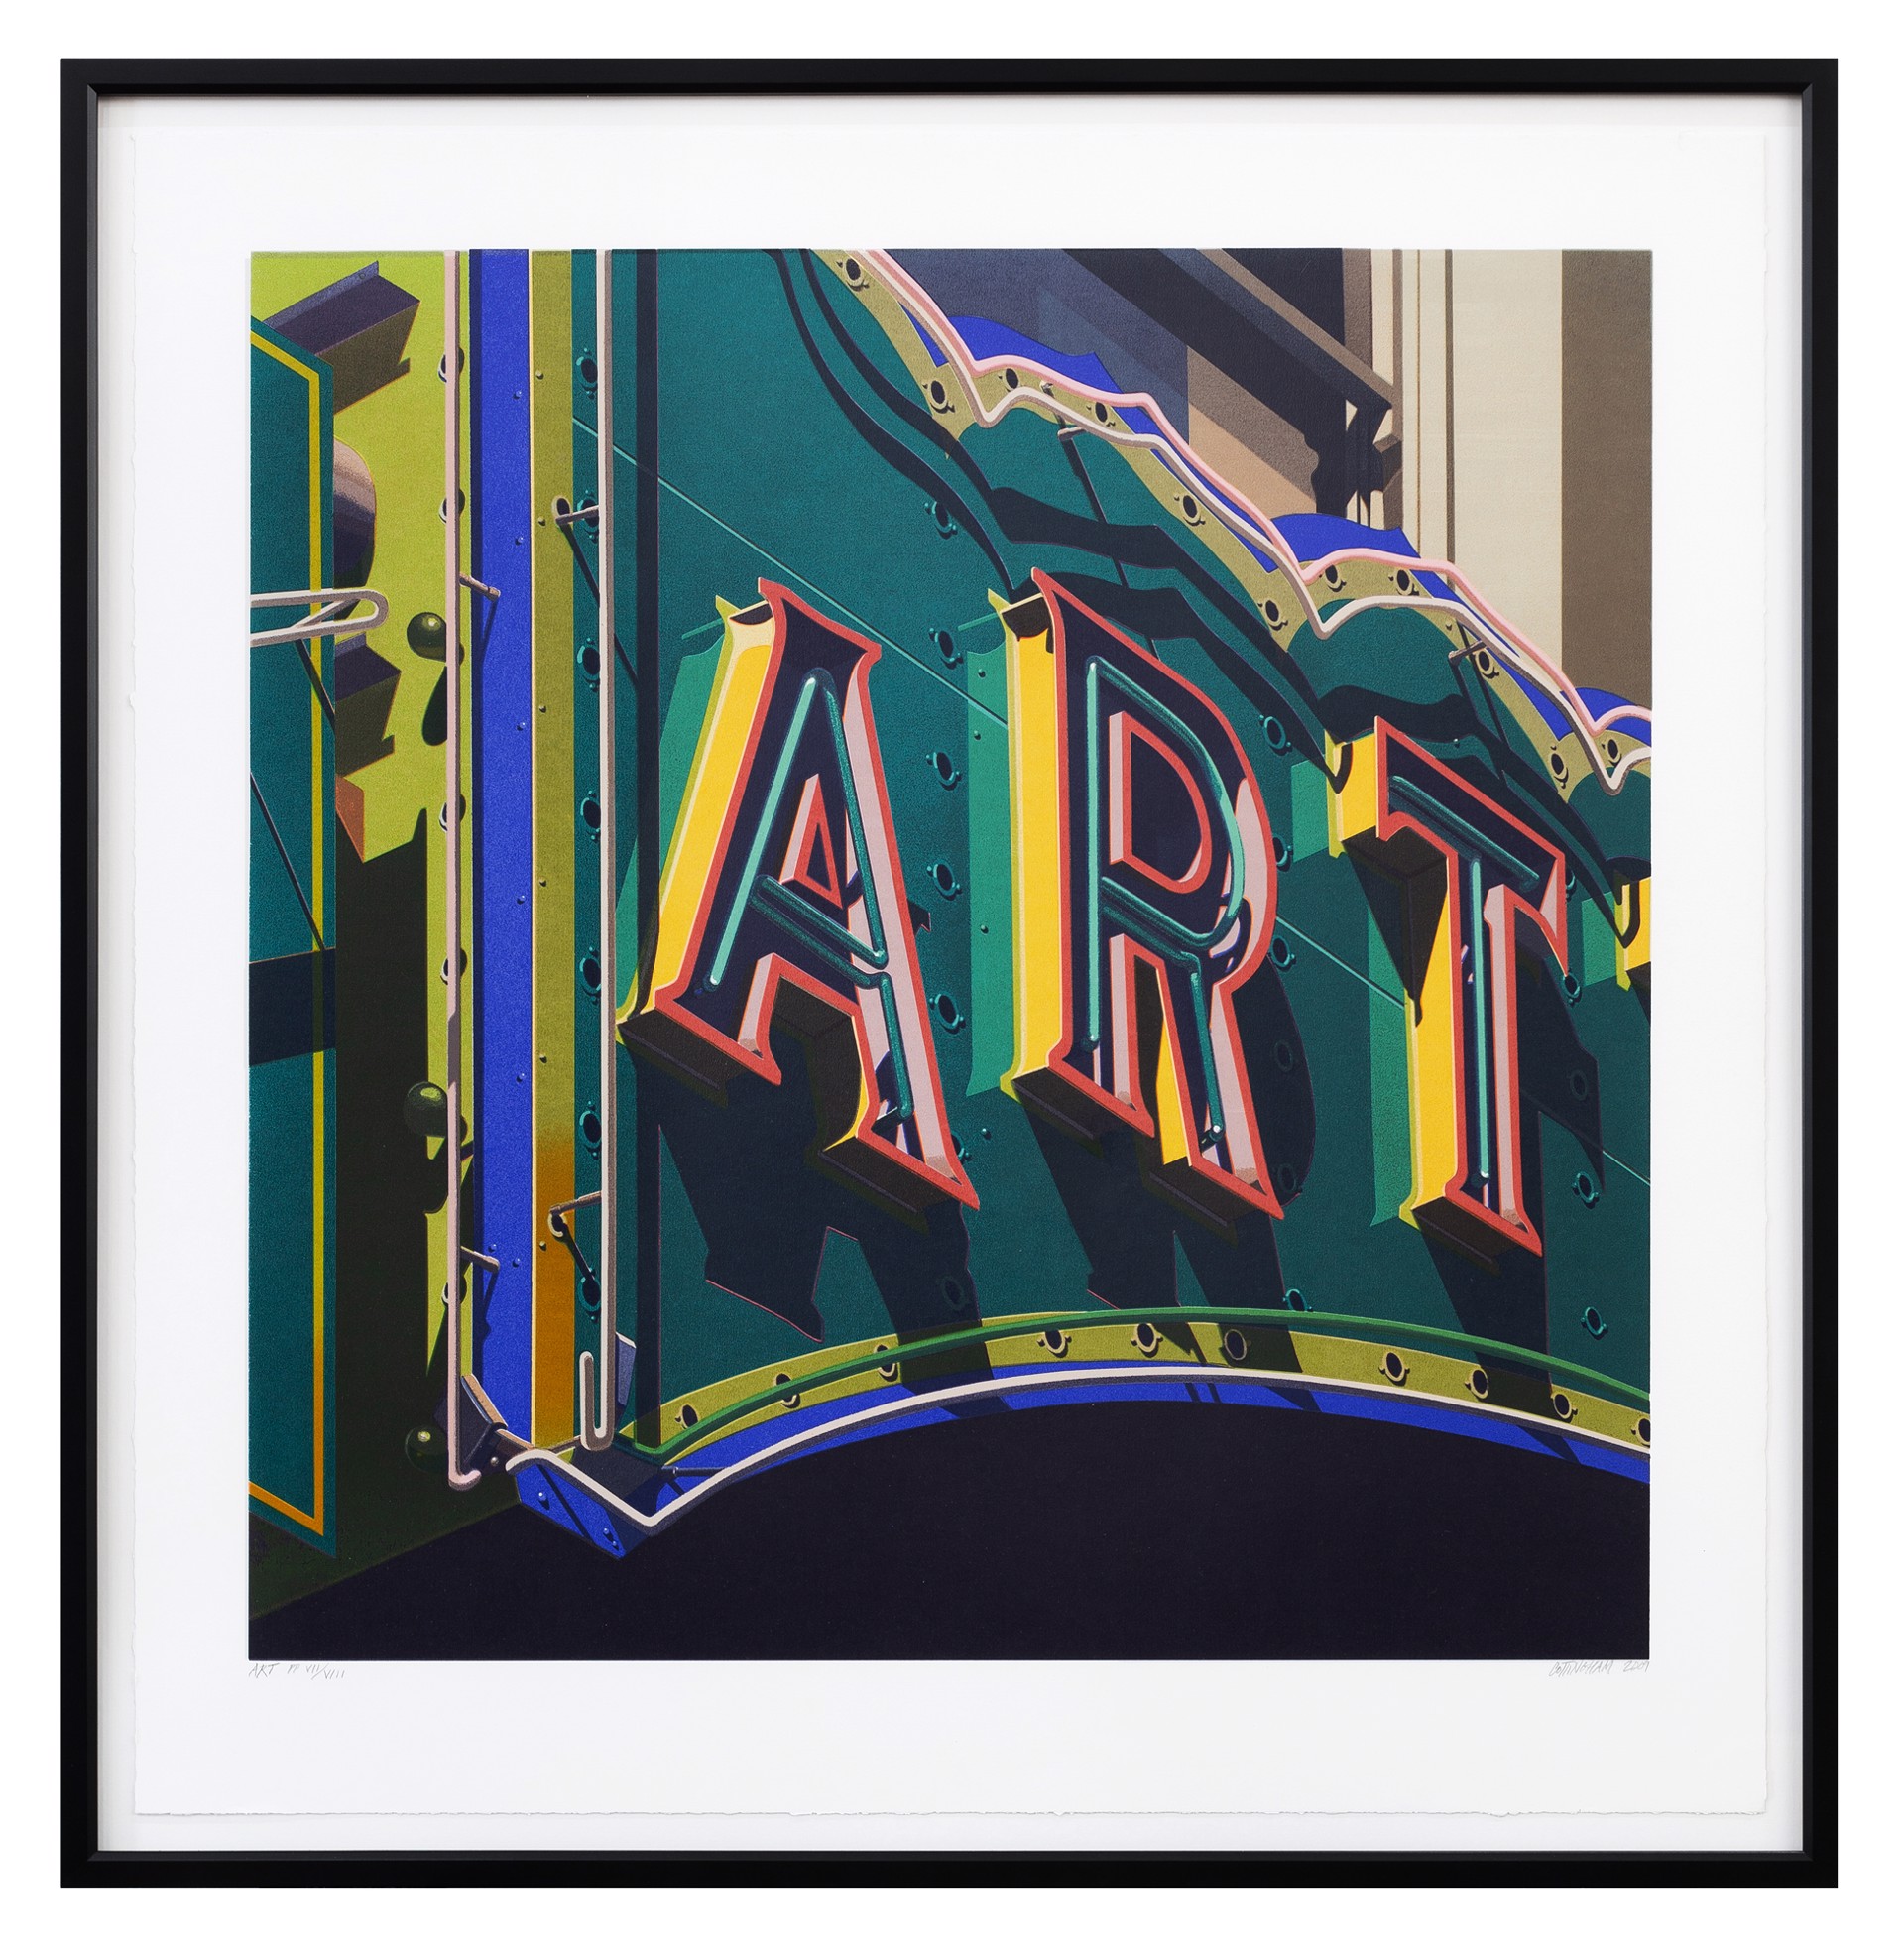 Art (from American Signs portfolio) by Robert Cottingham